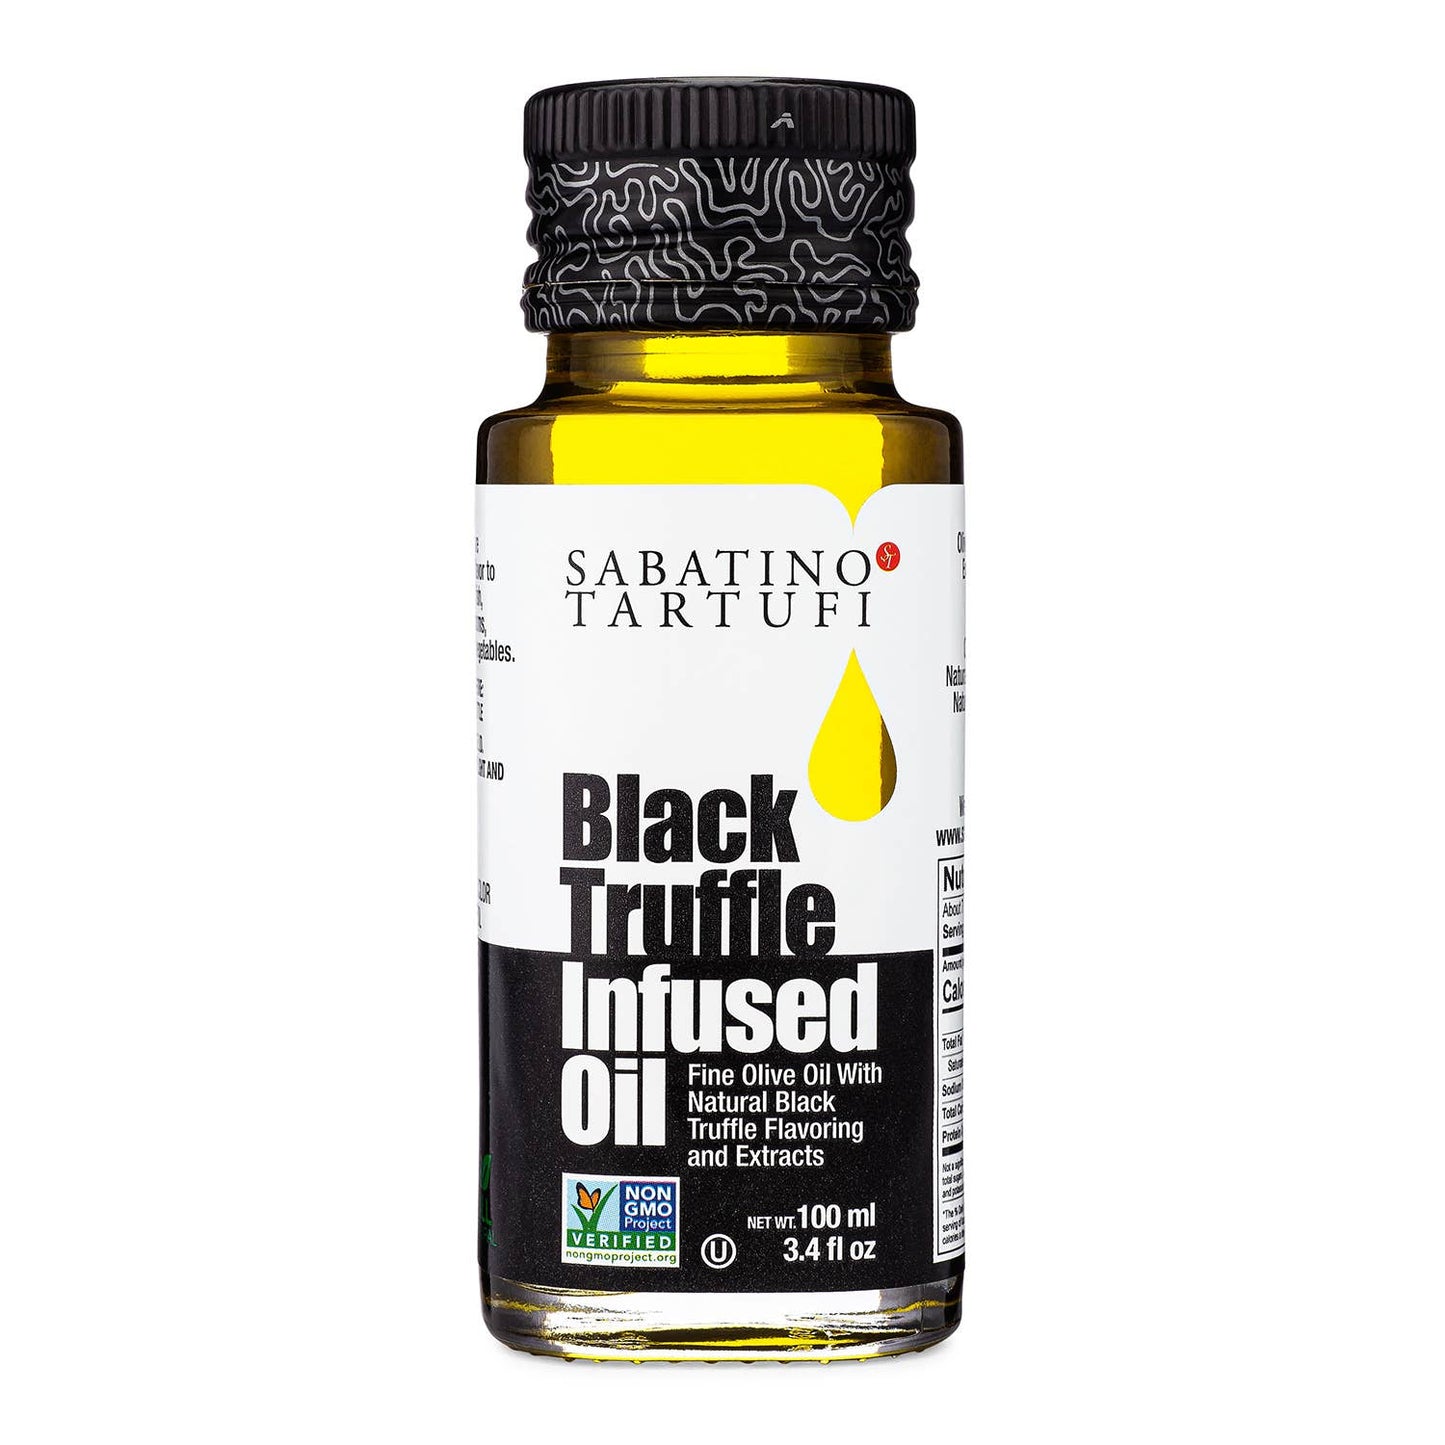 All Natural Black Truffle Infused Olive Oil